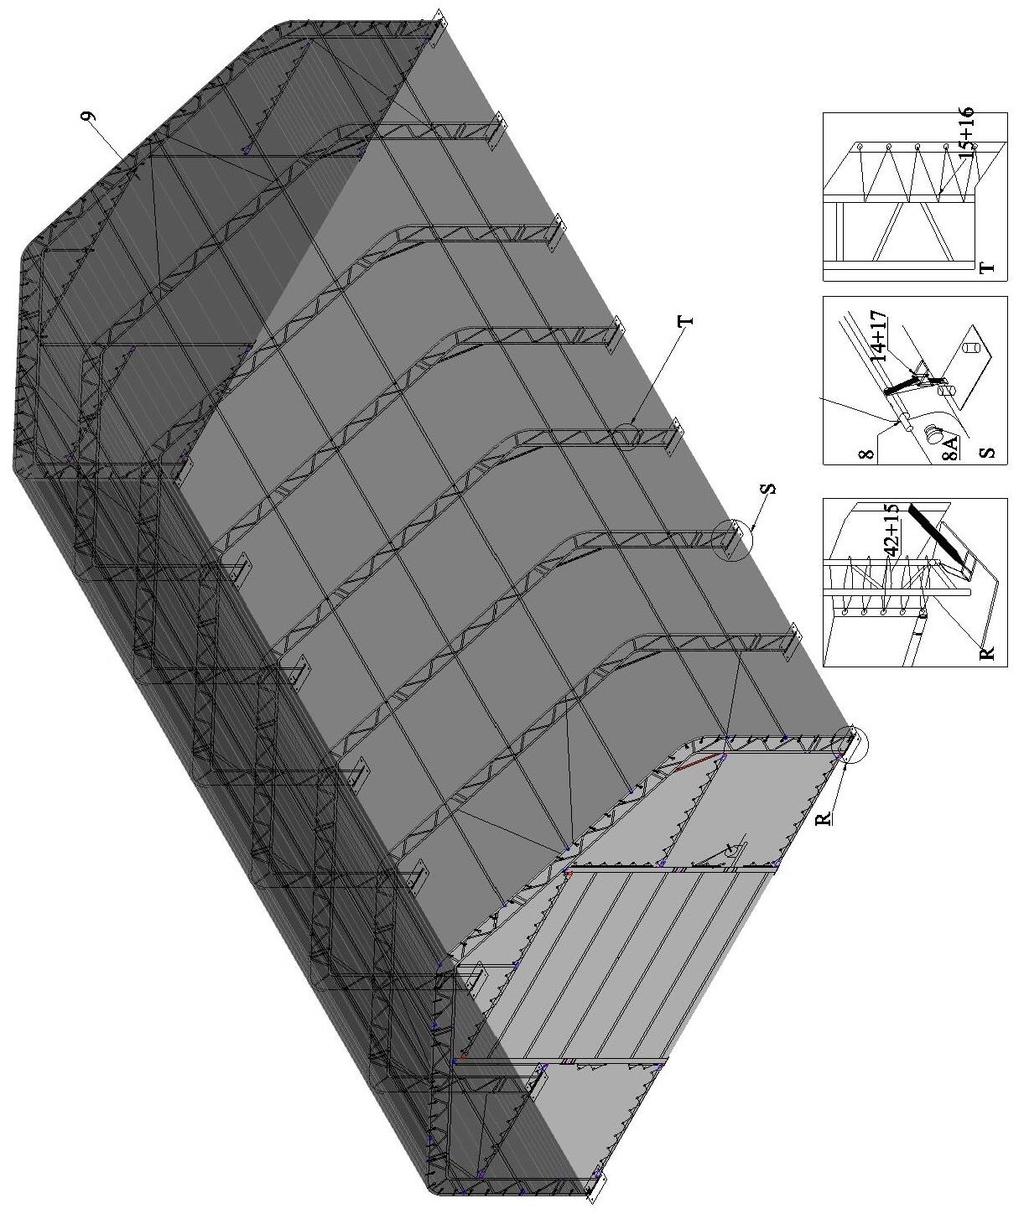 Figure 7 ROOF COVER